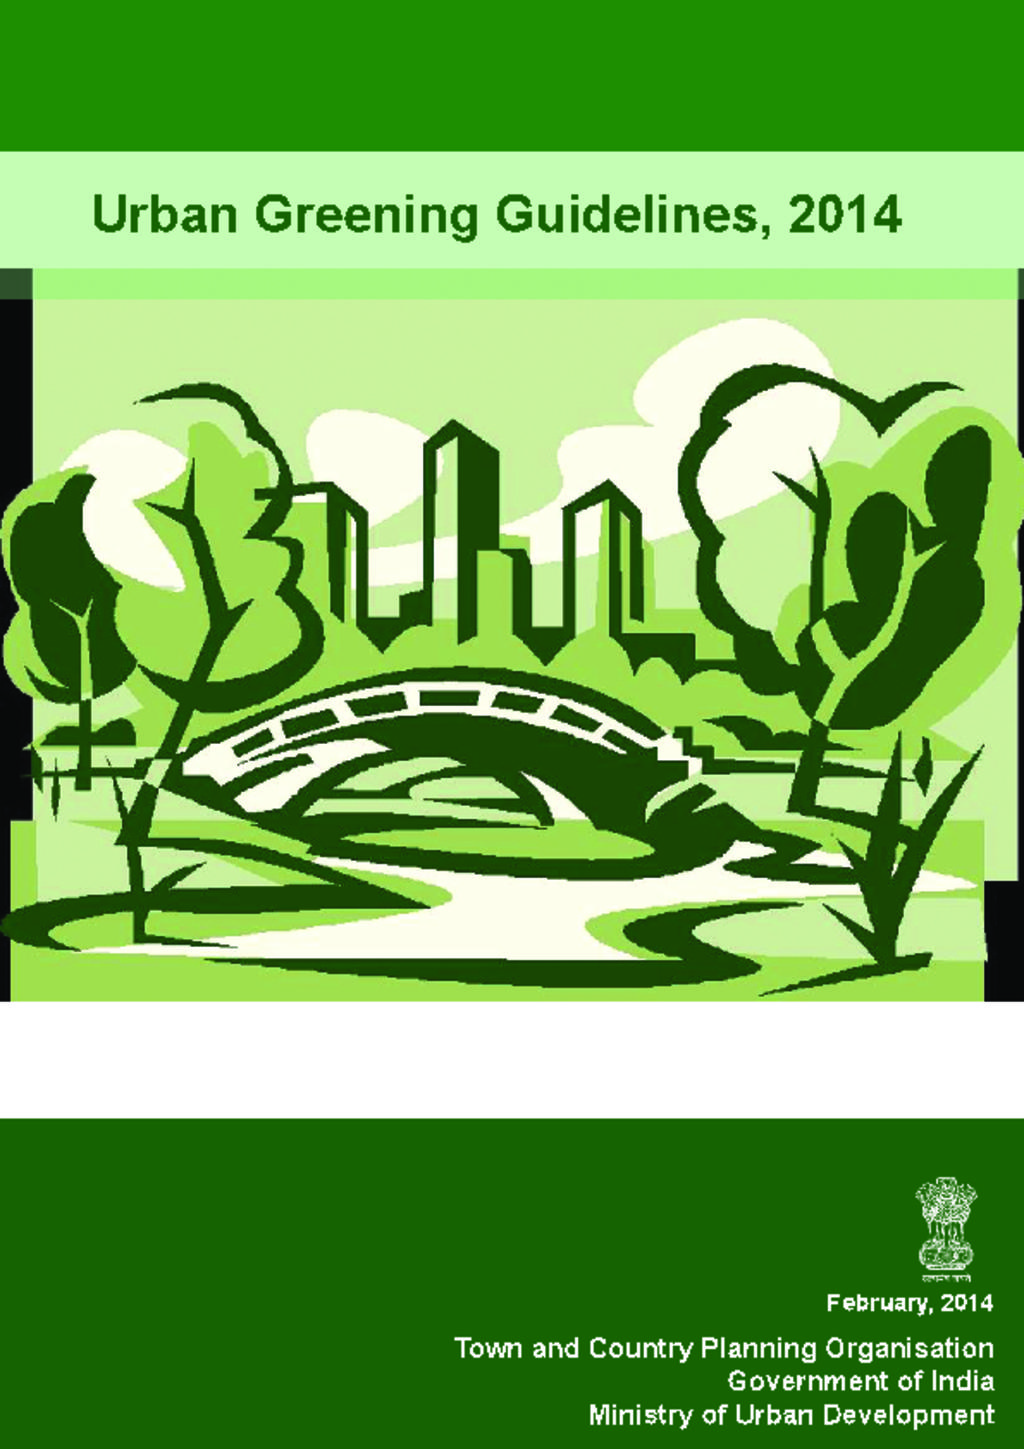 Urban Green guidelines